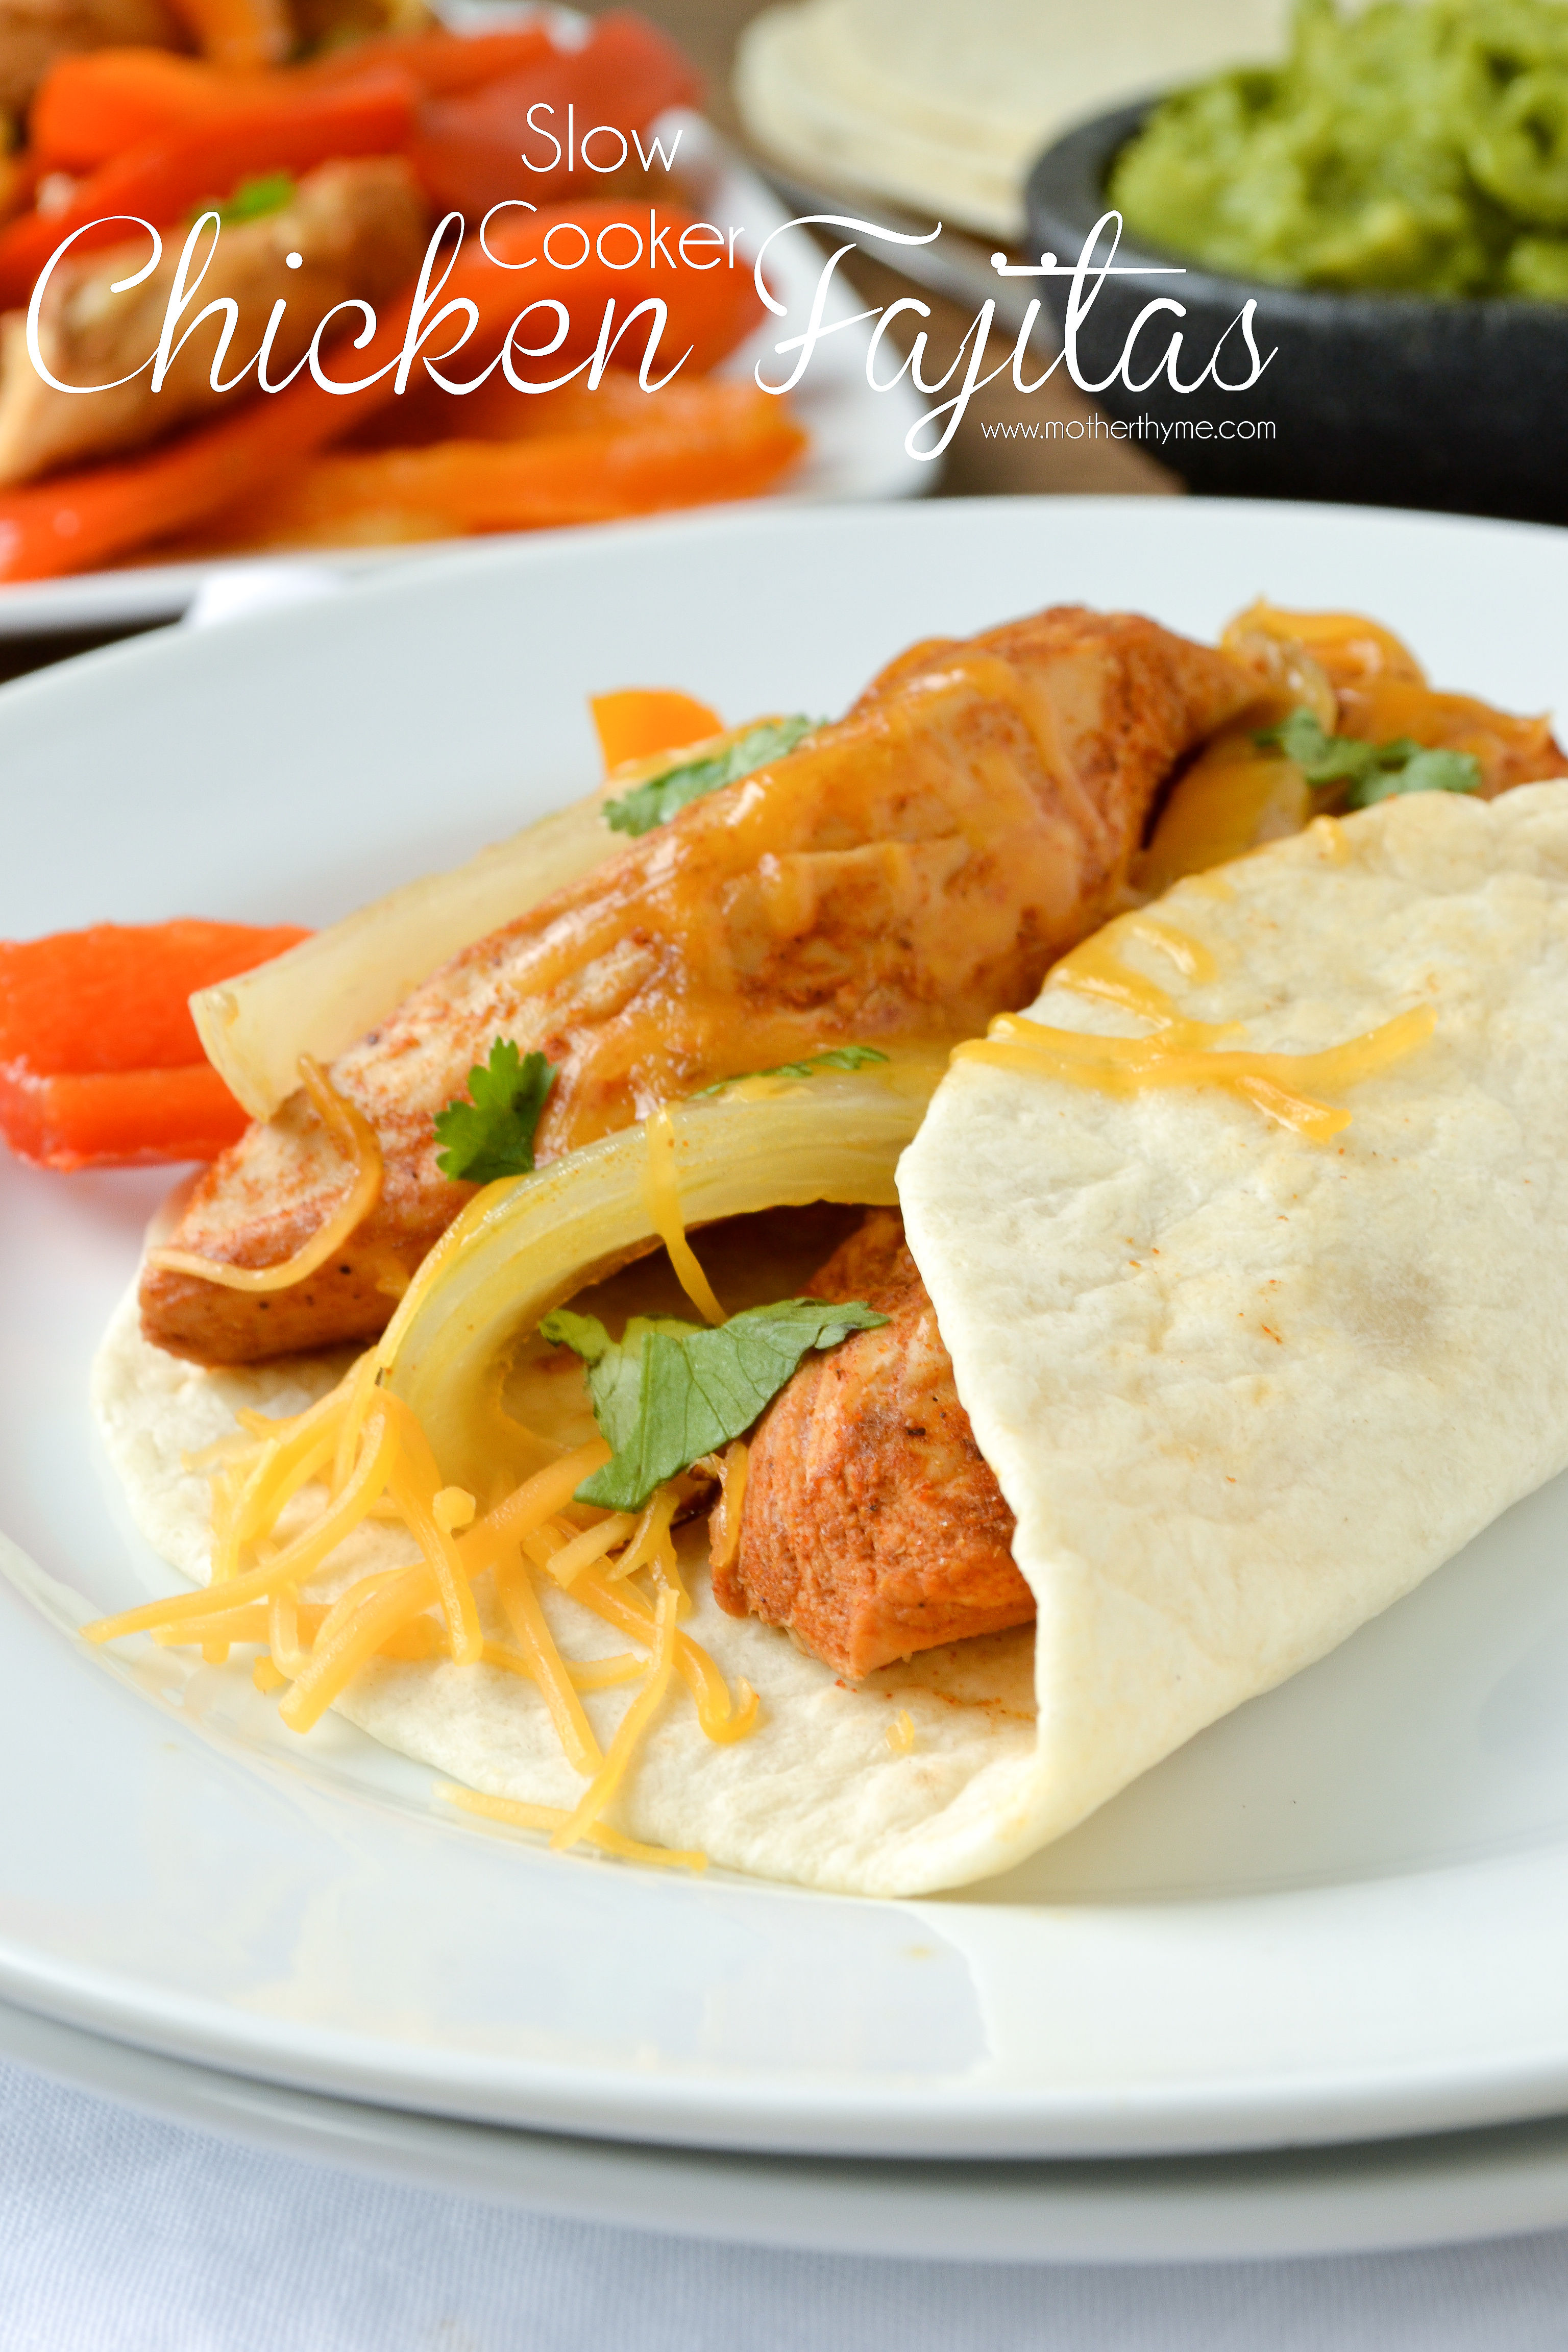 Slow Cooker Chicken Fajitas #PepperParty plus Le Creuset Giveaway!